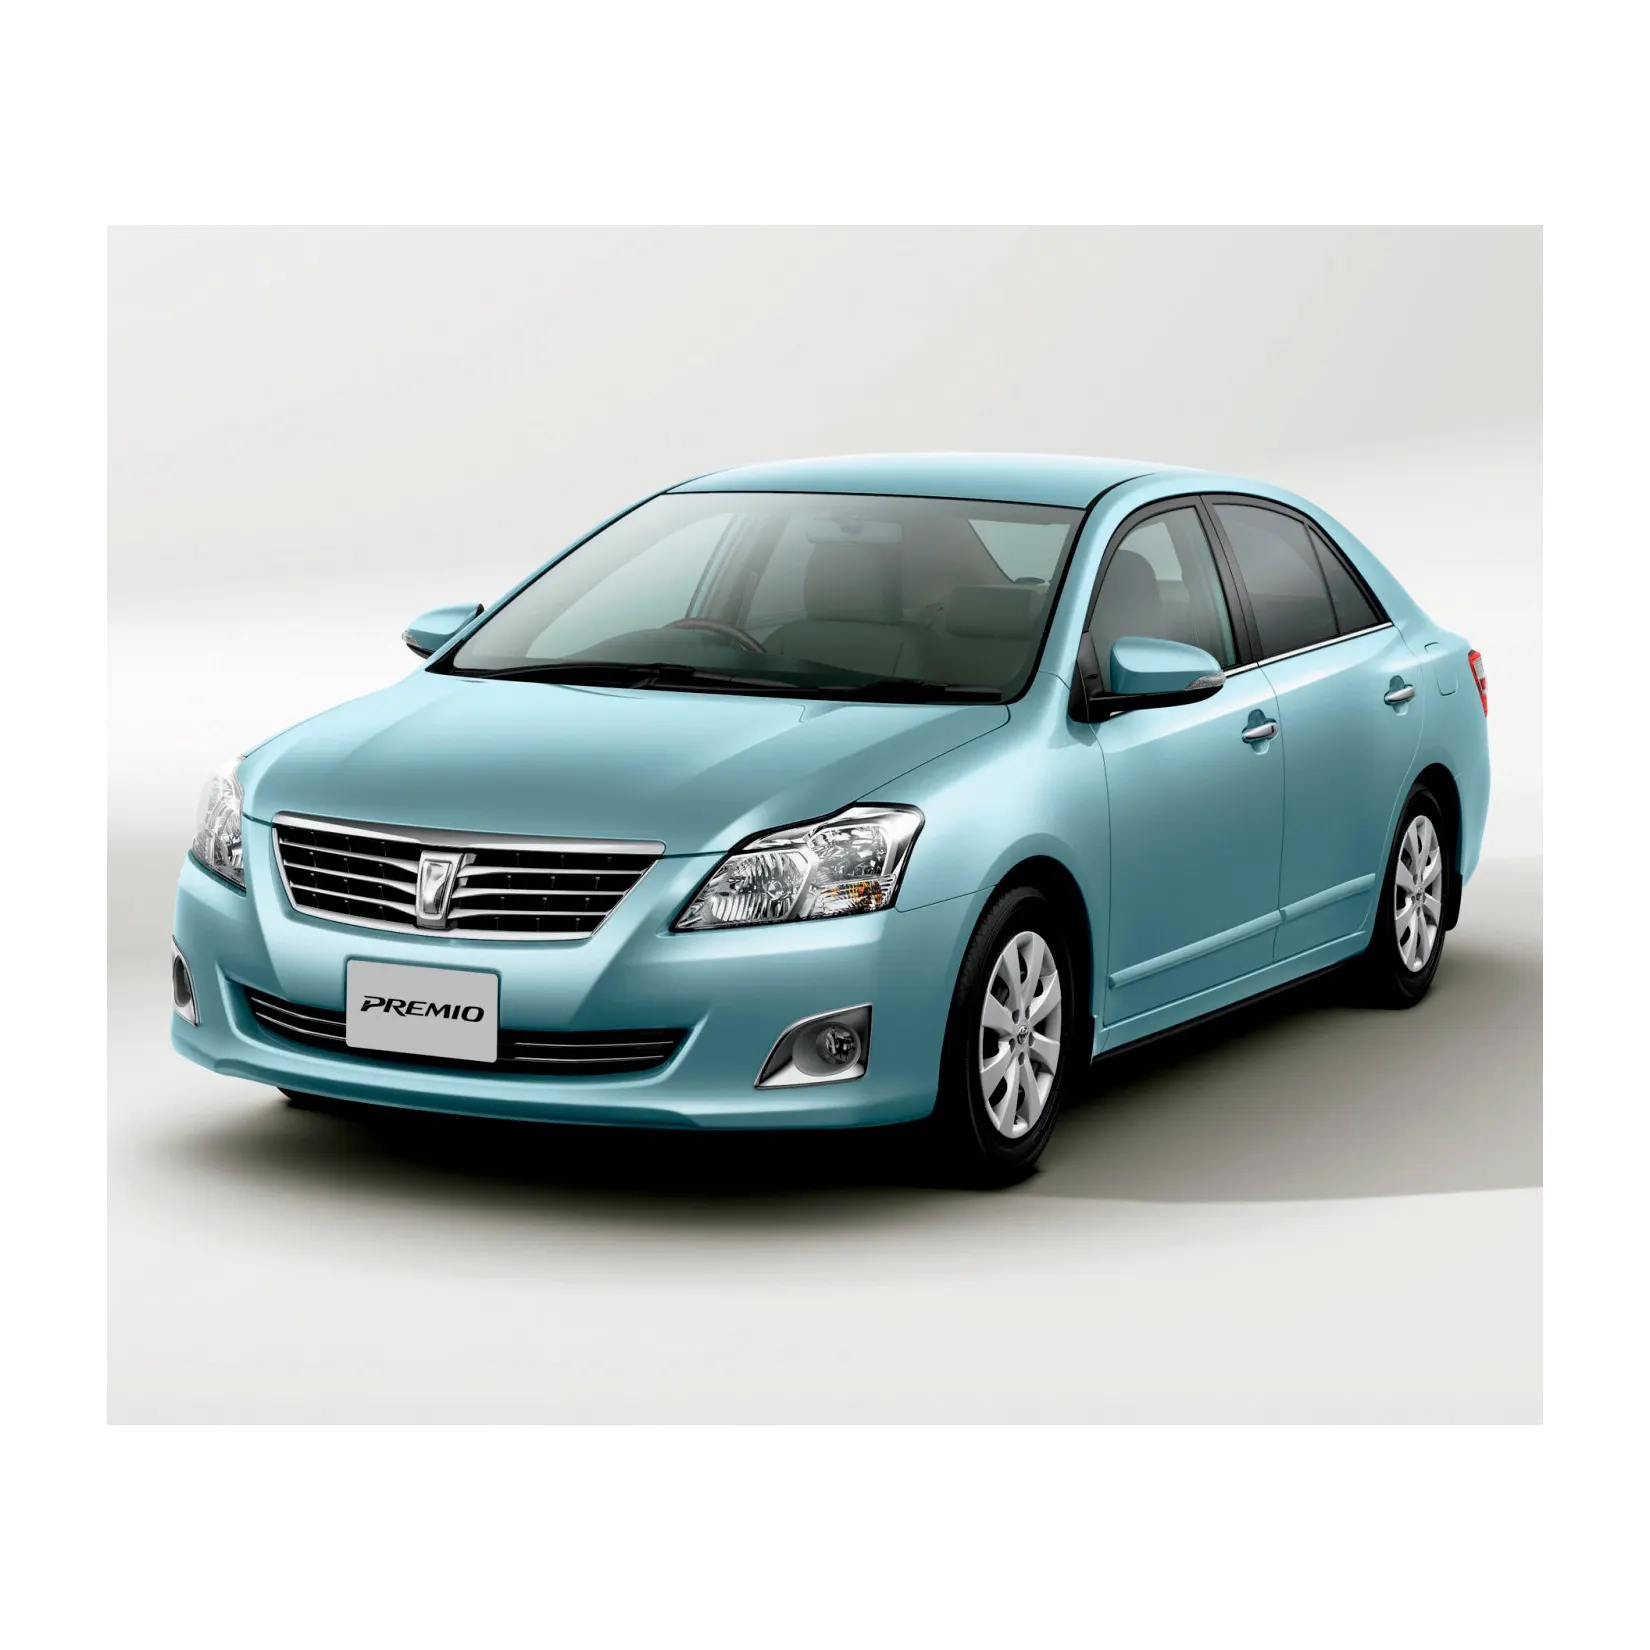 Shop for used cars Used High Quality selling second hand used Toyota Premio cars for sale